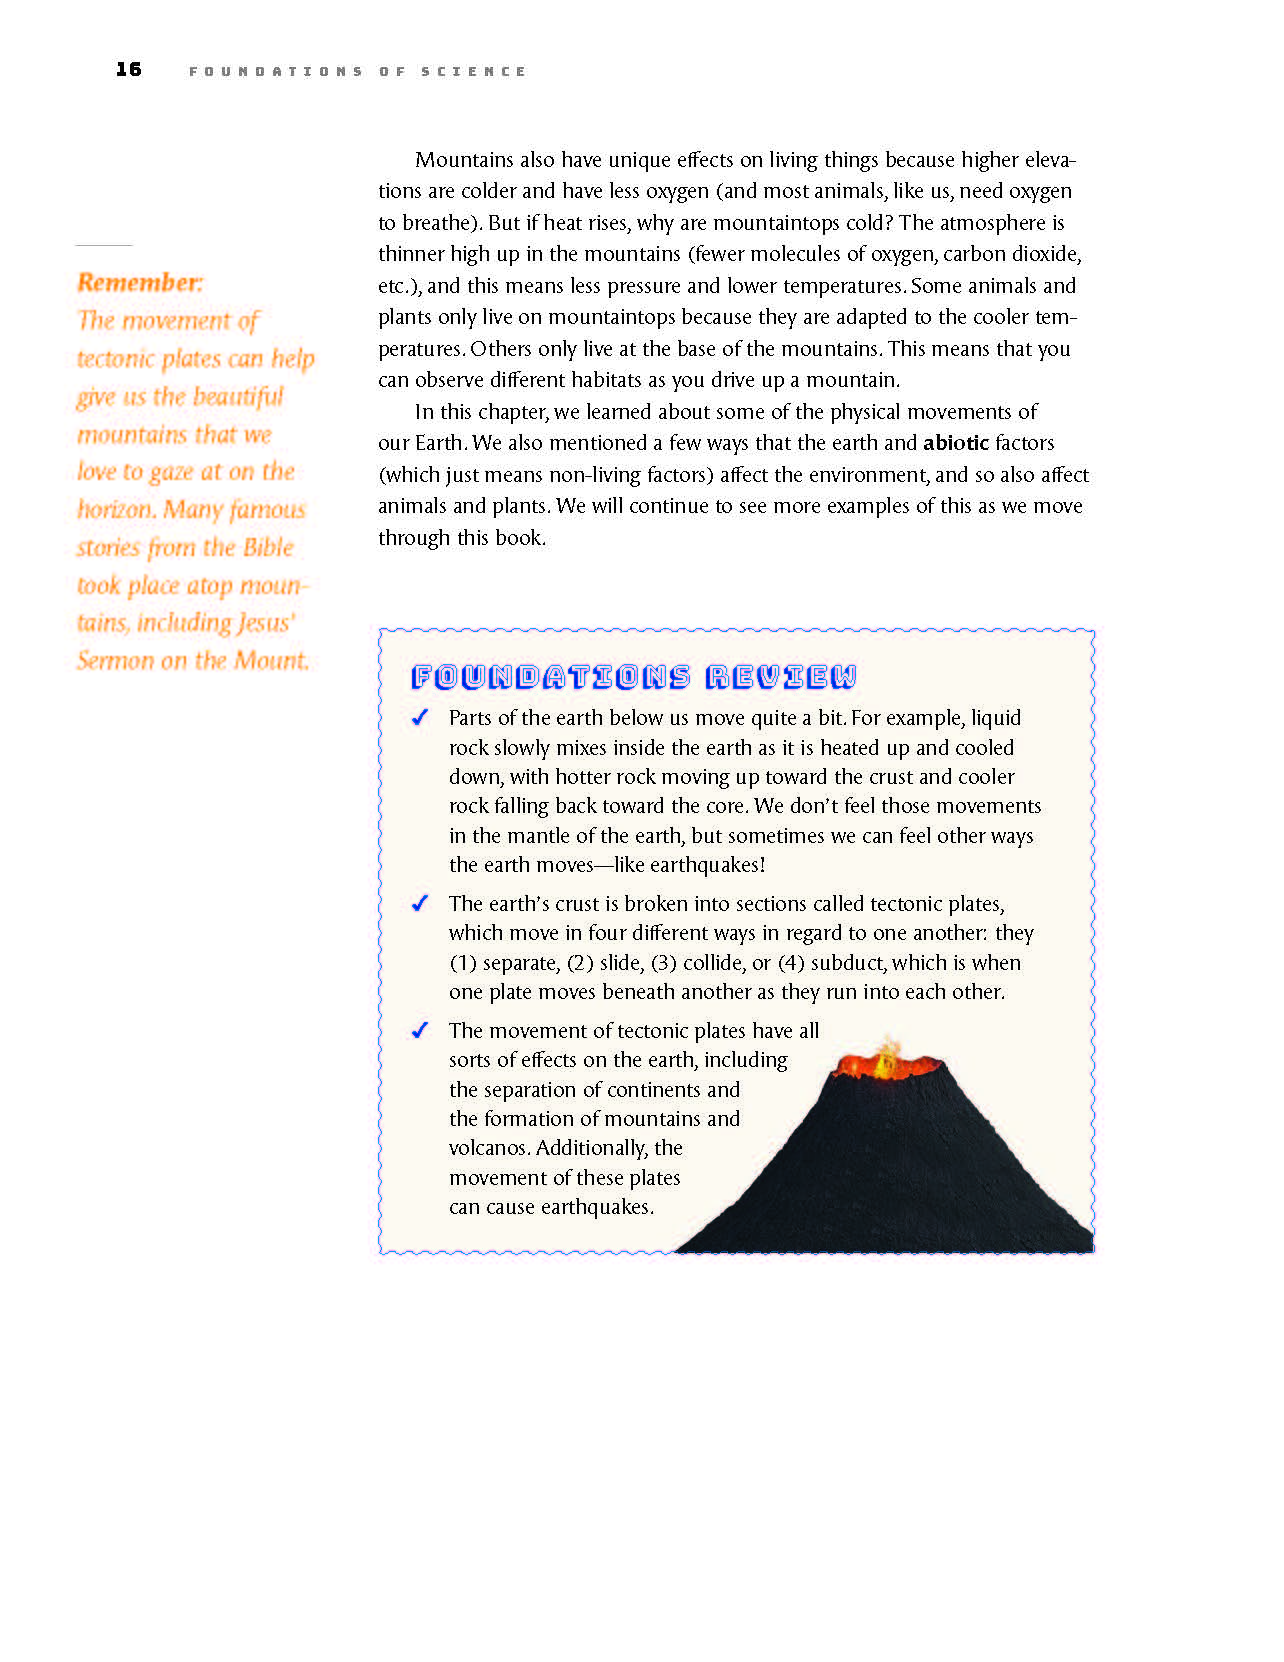 FOS-Earth-textbook_interior-marketing_Page_028